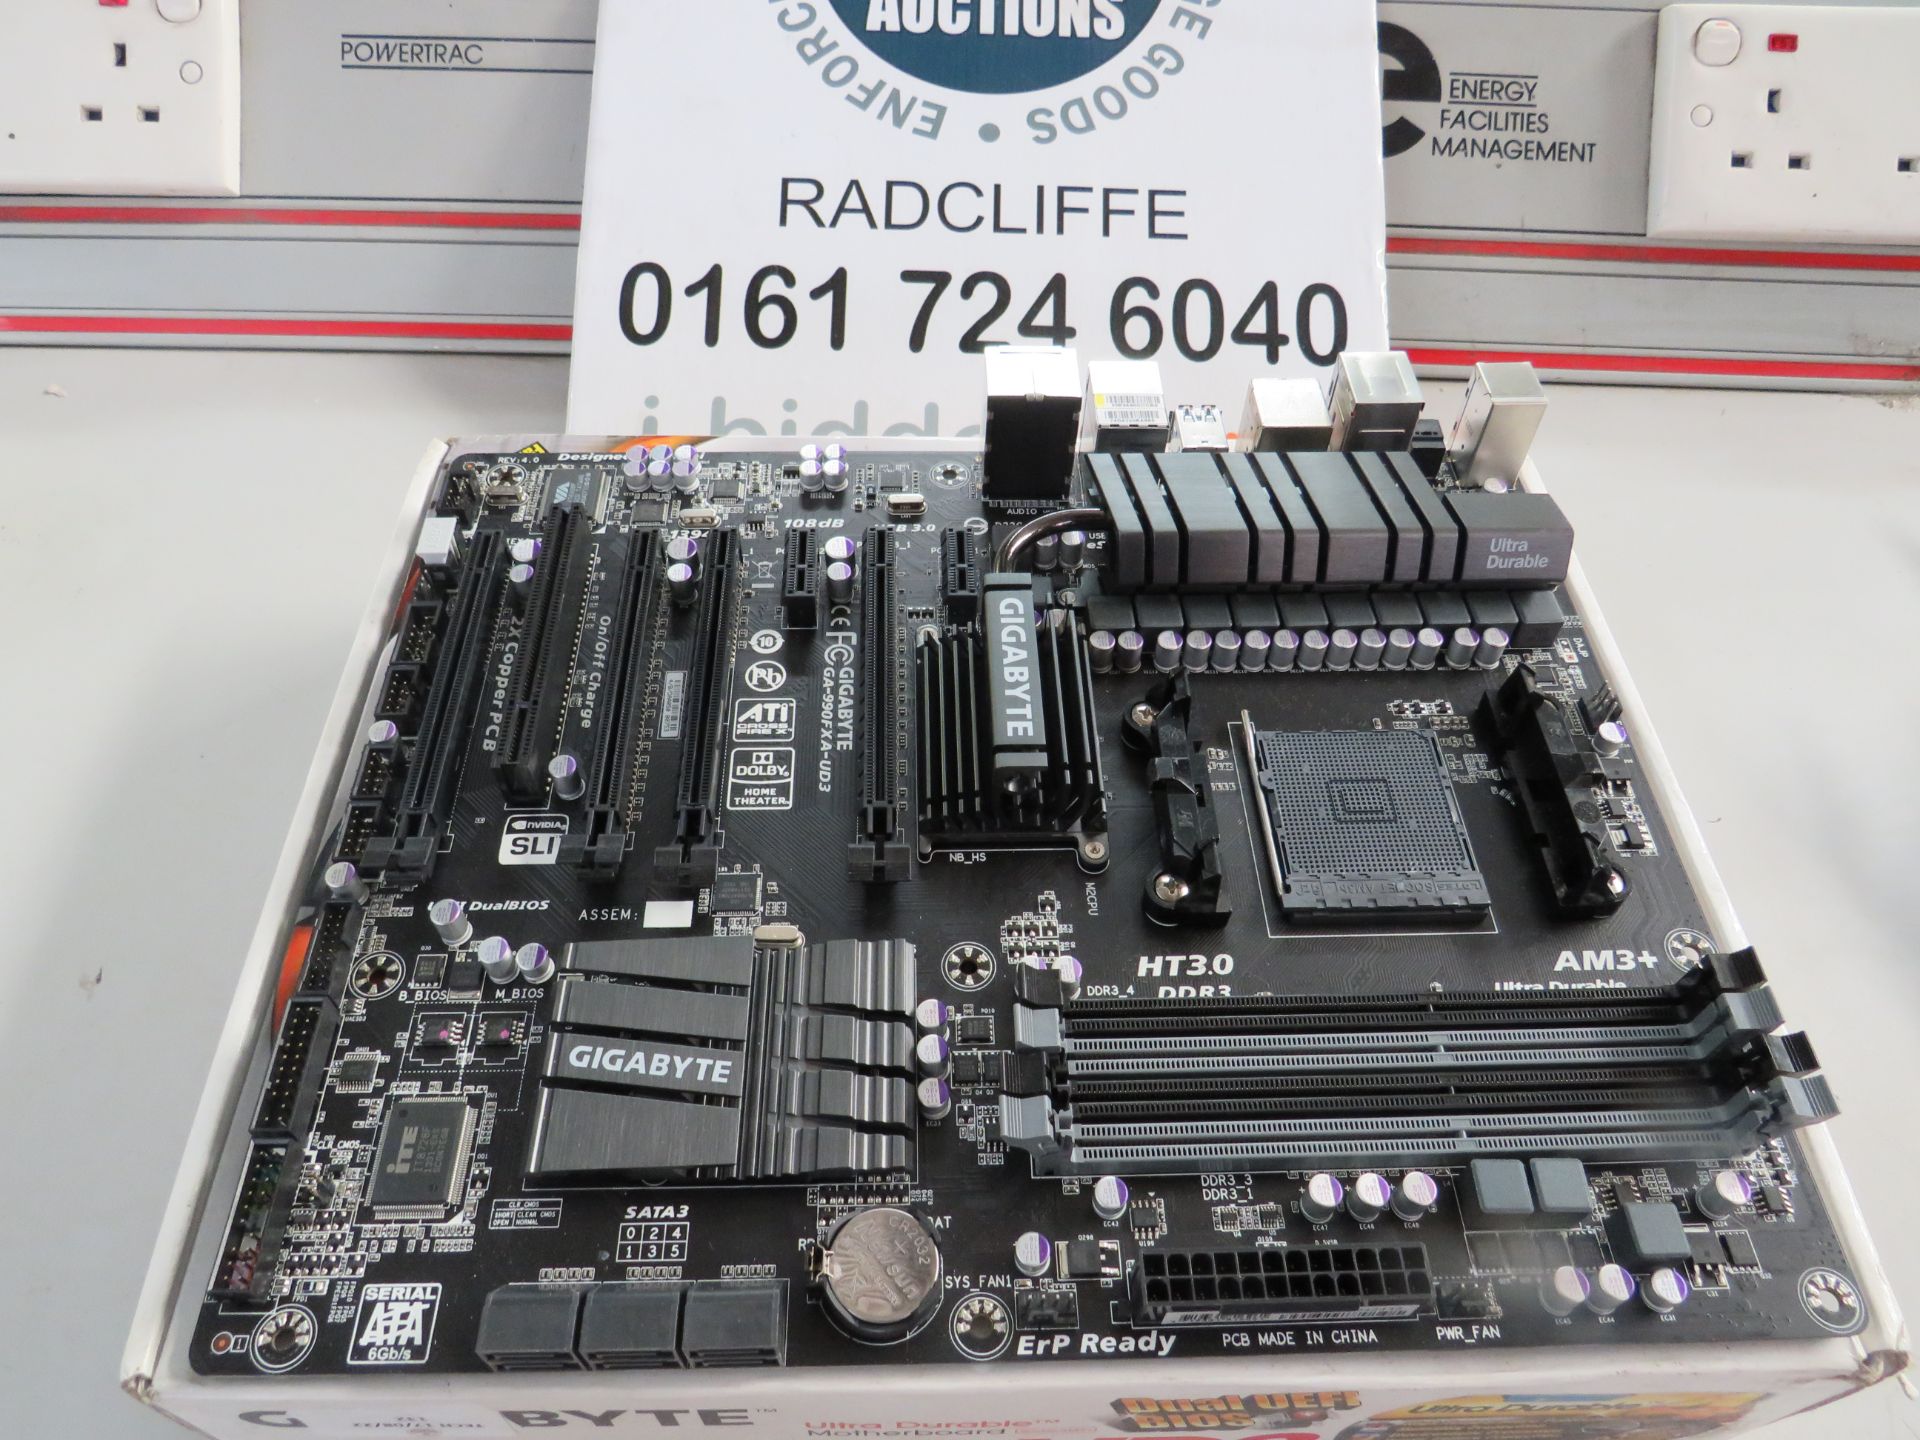 Gigabyte 990FXA-UD3 motherboard, unchecked, comes in original box